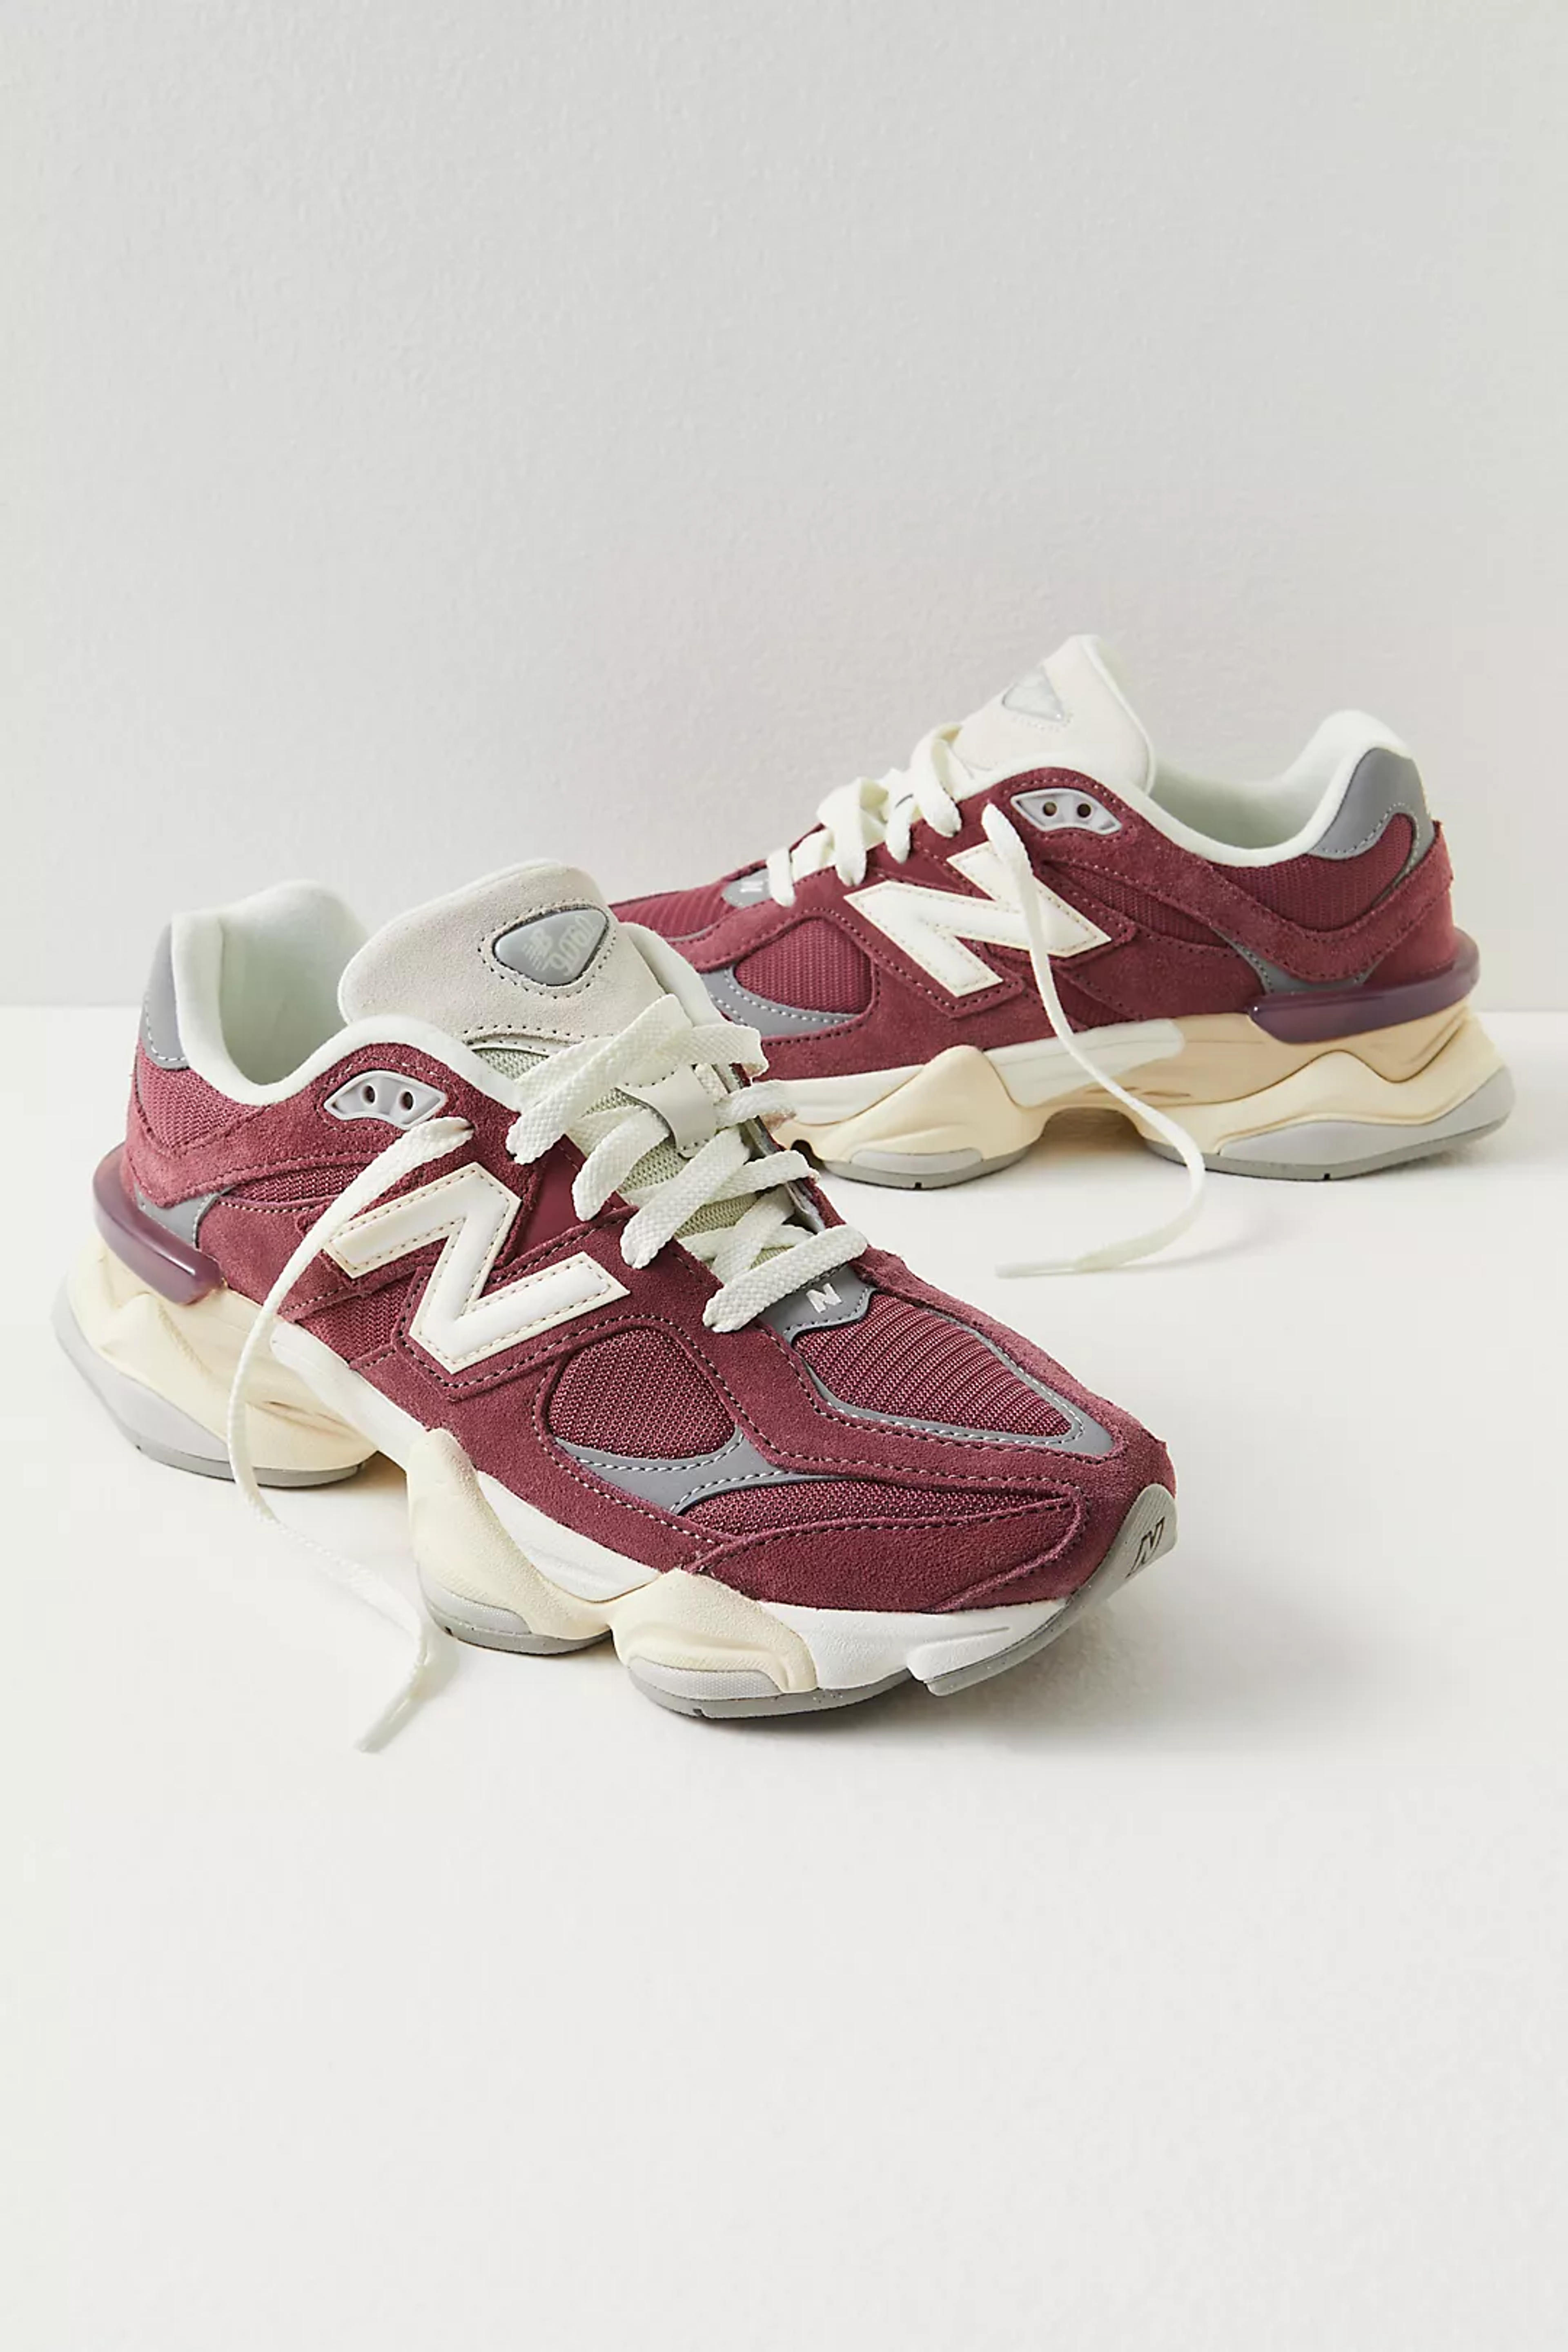 New Balance 9060 Sneakers | Free People